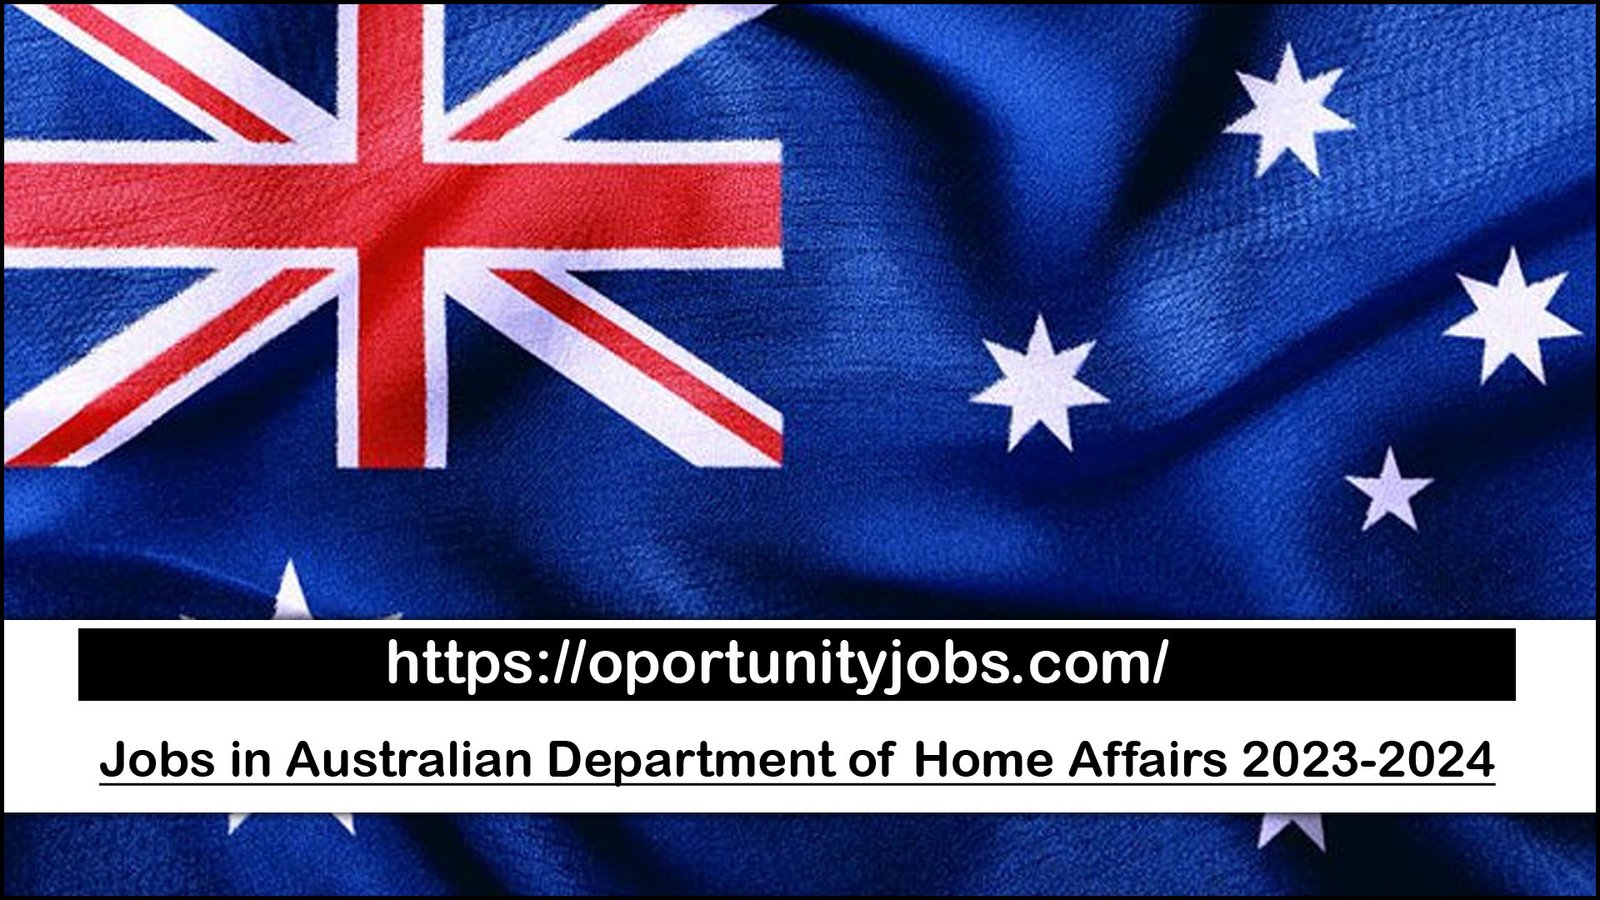 Jobs in Australian Department of Home Affairs 2023-2024